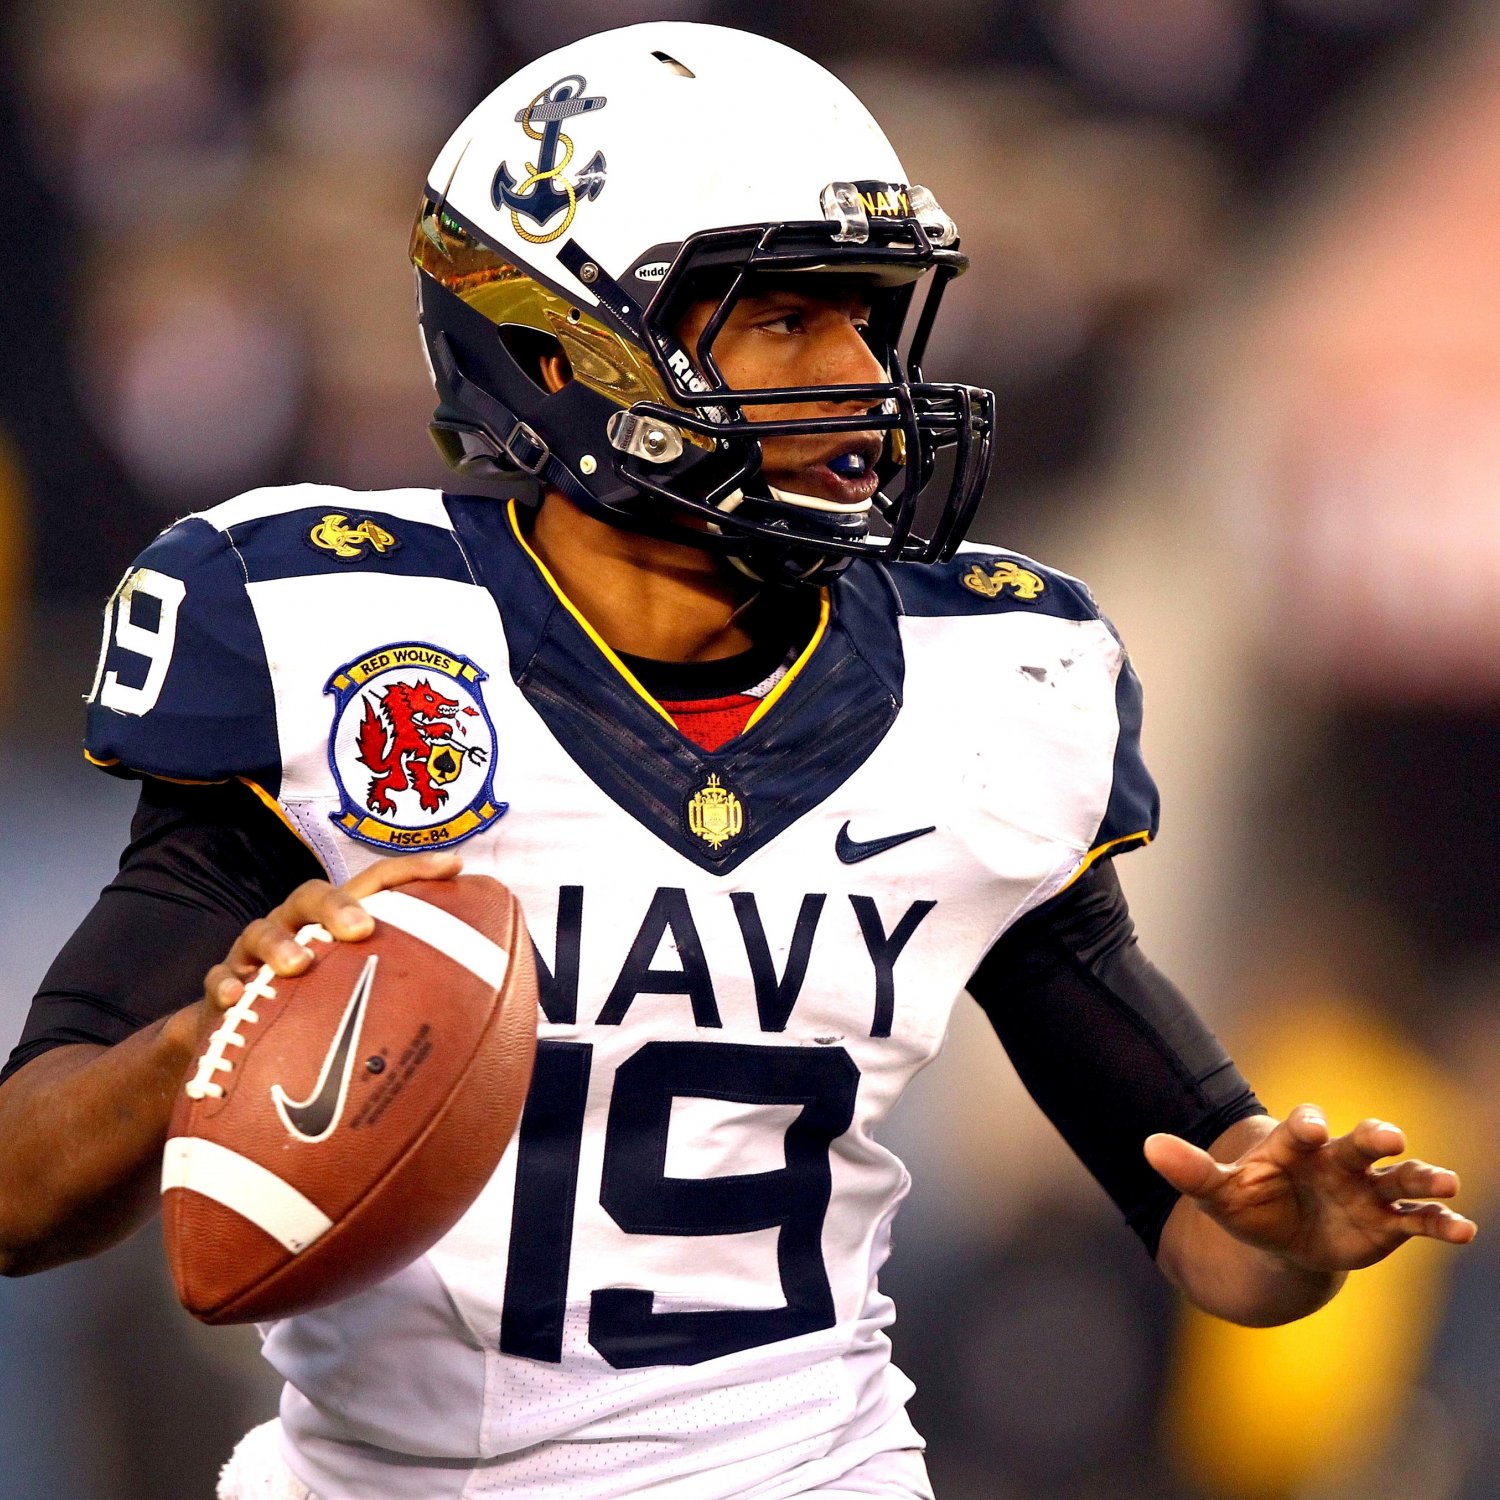 ArmyNavy Game 2012 Live Score, Results and Analysis Bleacher Report